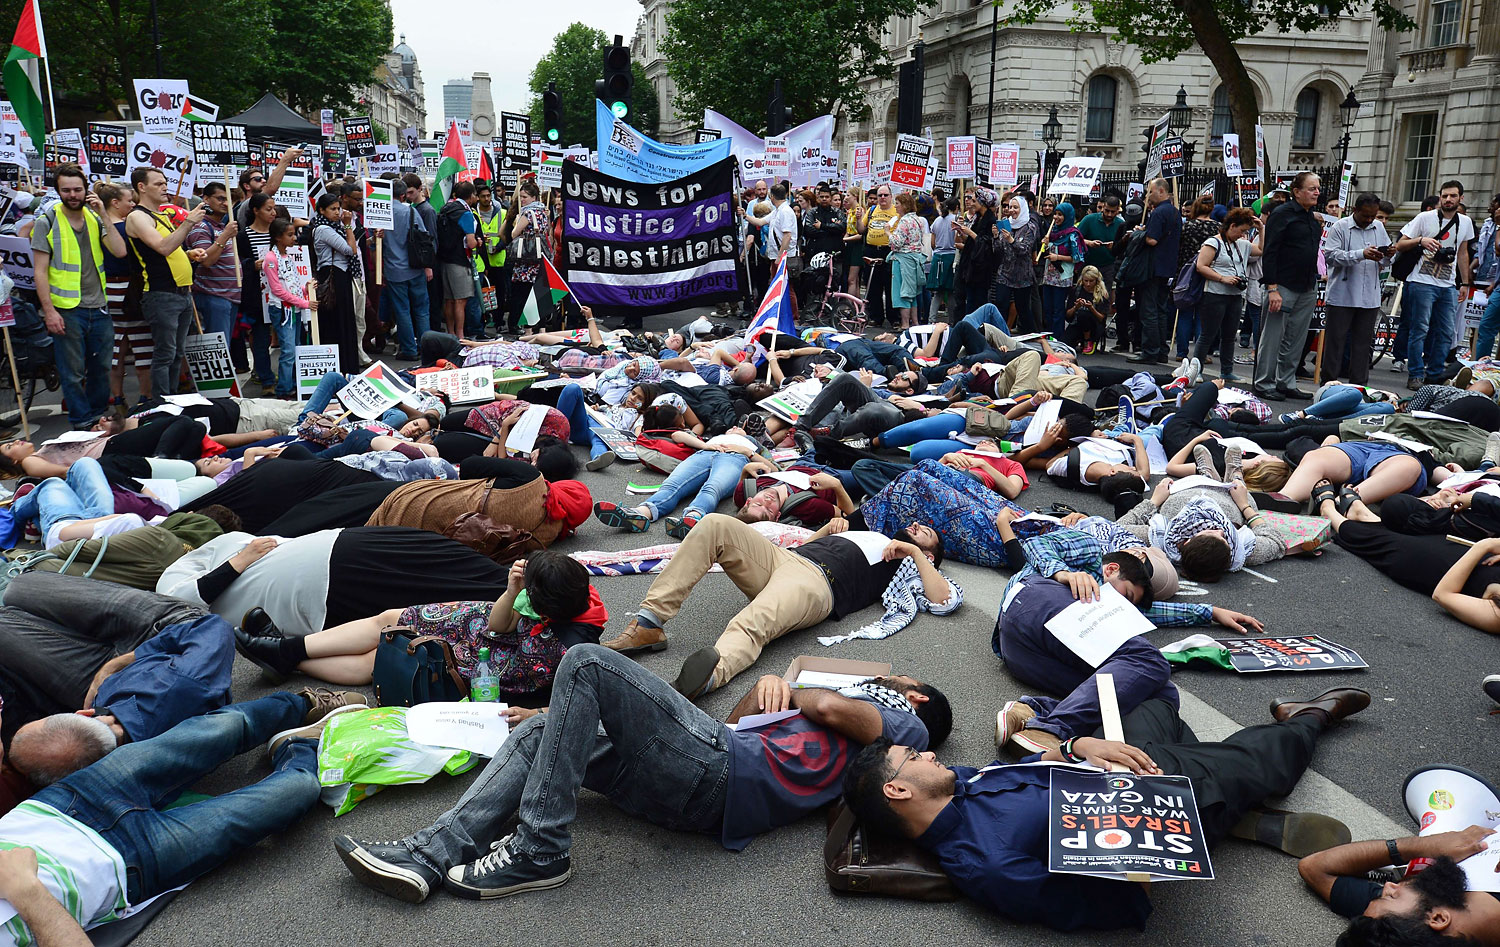 Protesters in demonstration against Israeli airstrikes in Gaza in central London on July 19, 2014. (Carl Court—AFP/Getty Images)